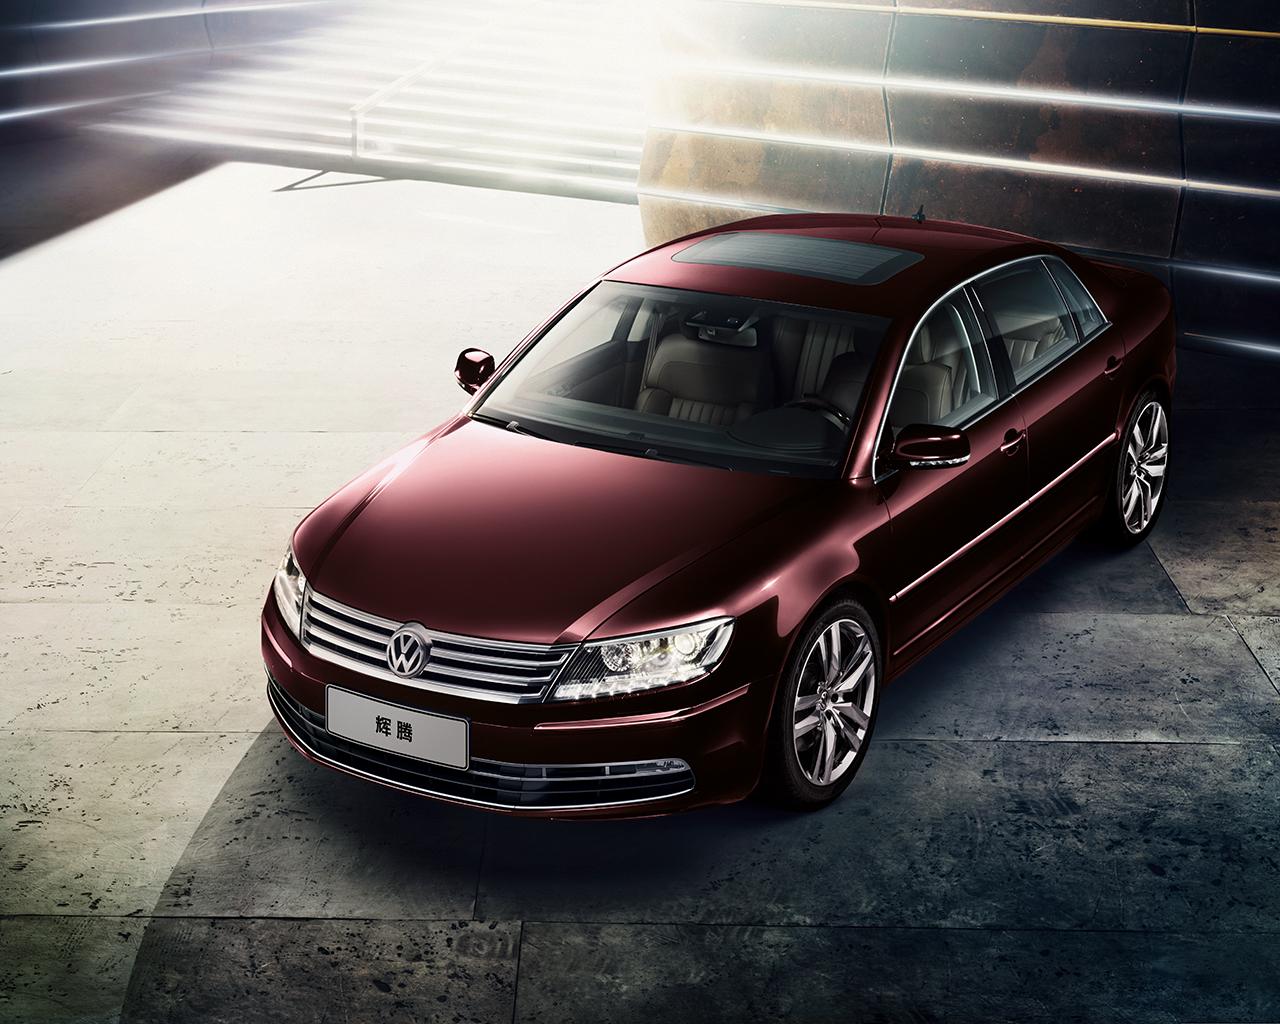 The Volkswagen Phaeton continues to sell in China and it gets updated (1)